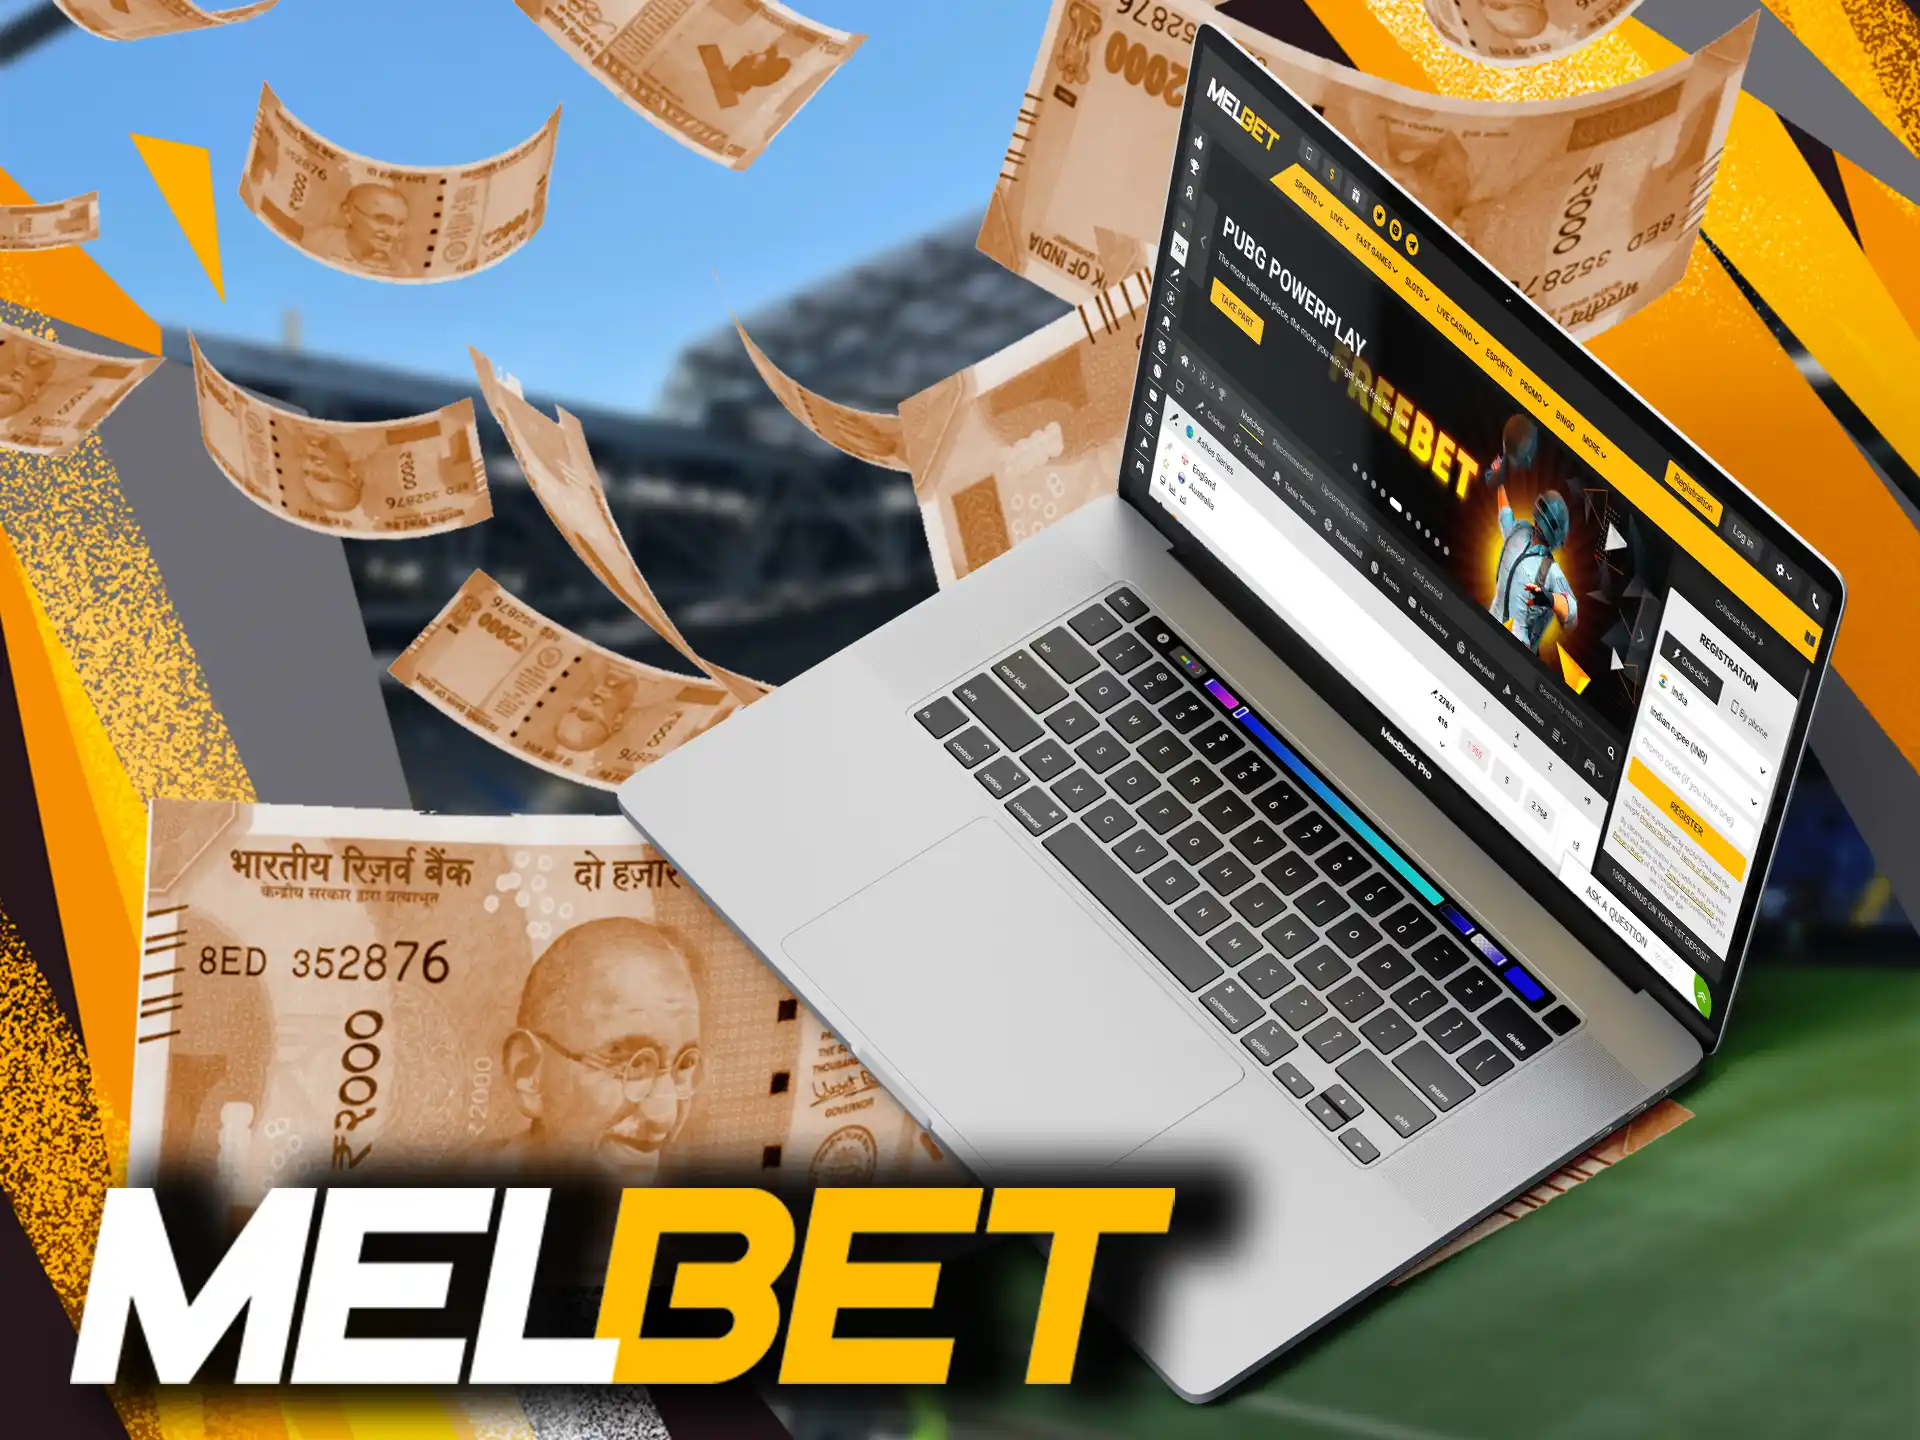 Melbet company will help you quickly get your winnings in a convenient way for India.